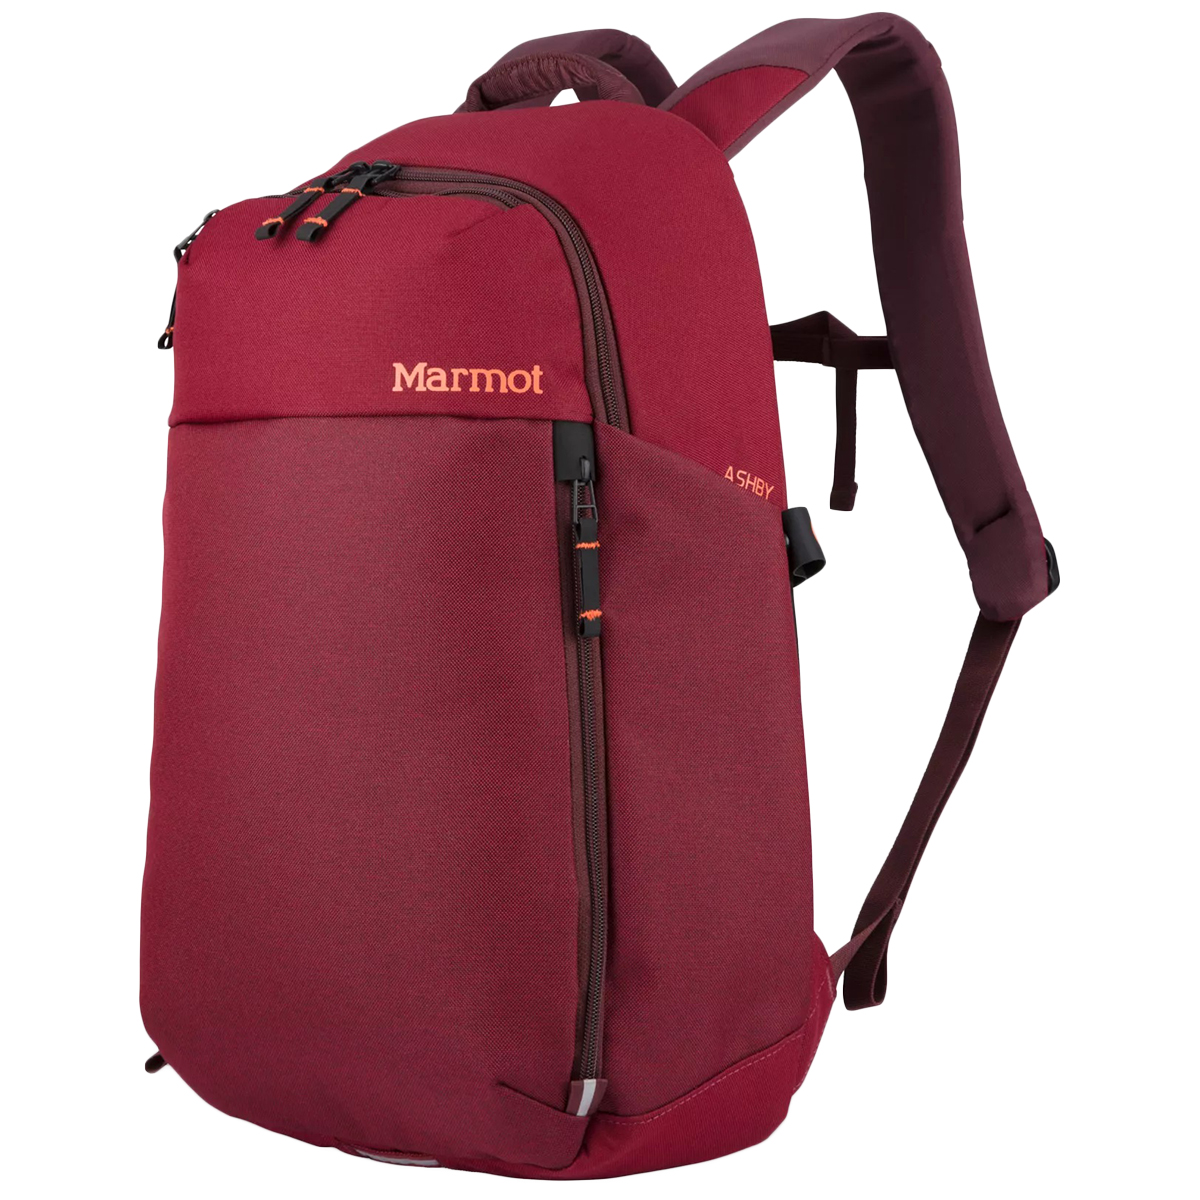 Marmot Ashby Day Pack, Red